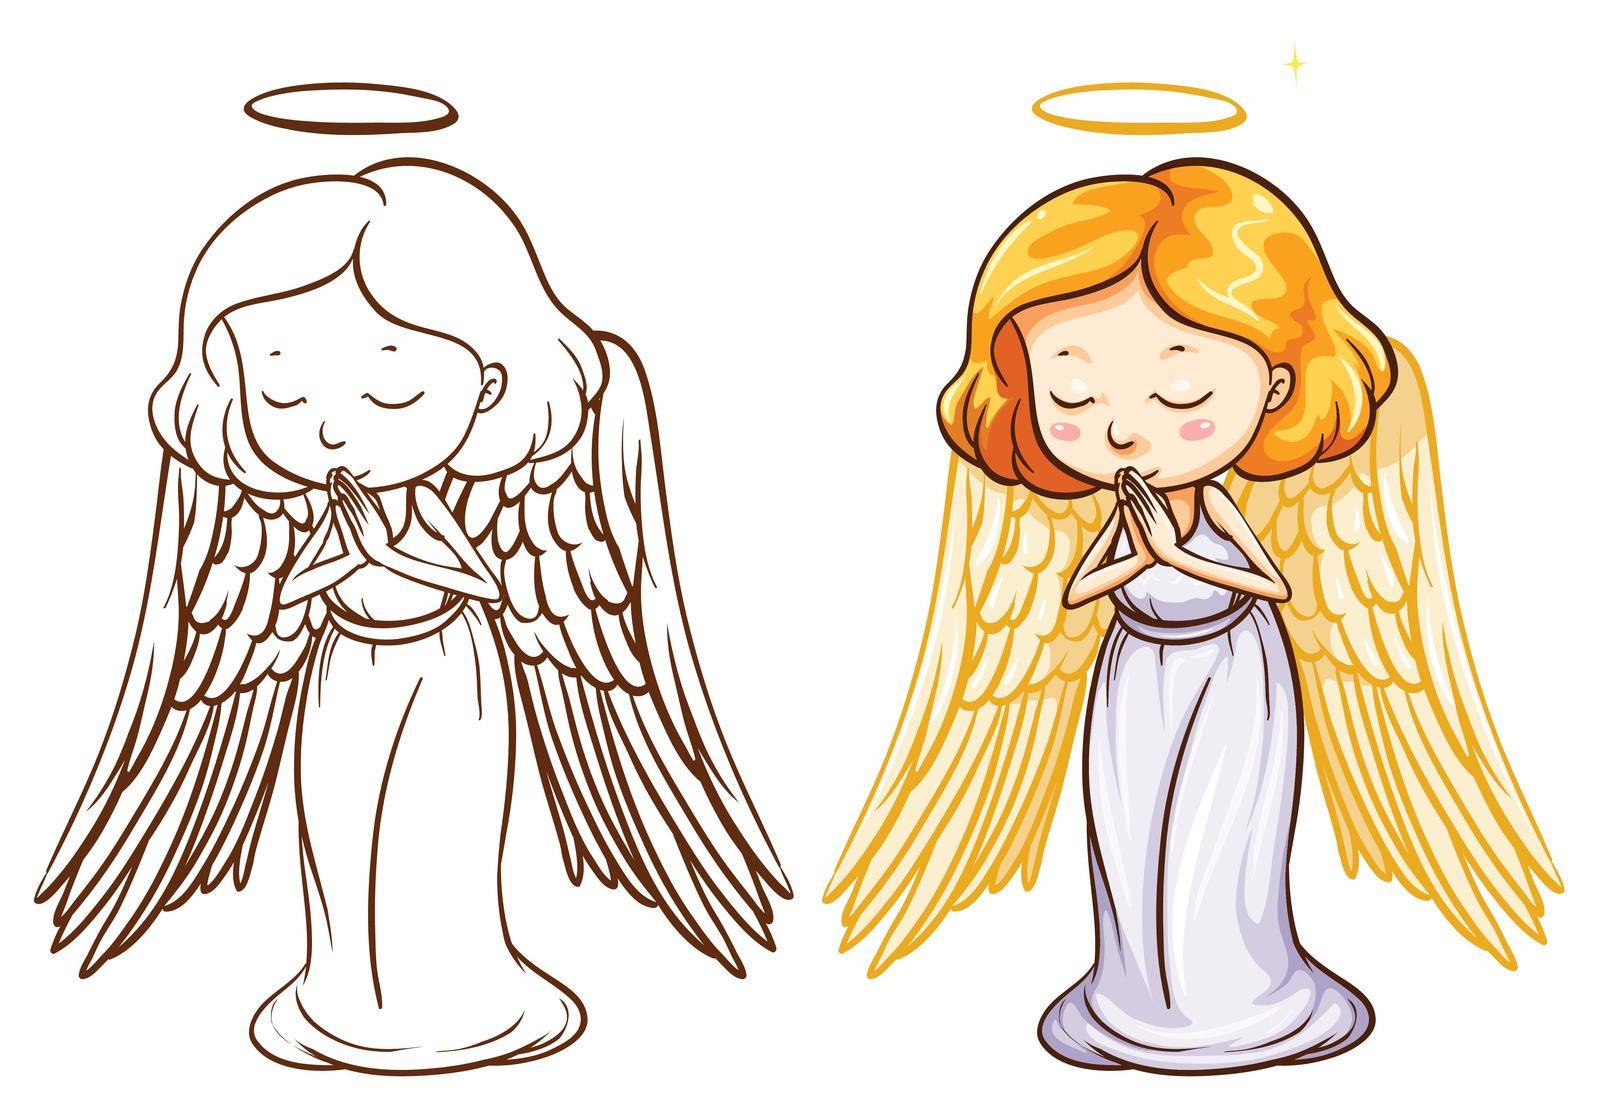 Illustration of the two sketches of an angel on a white background